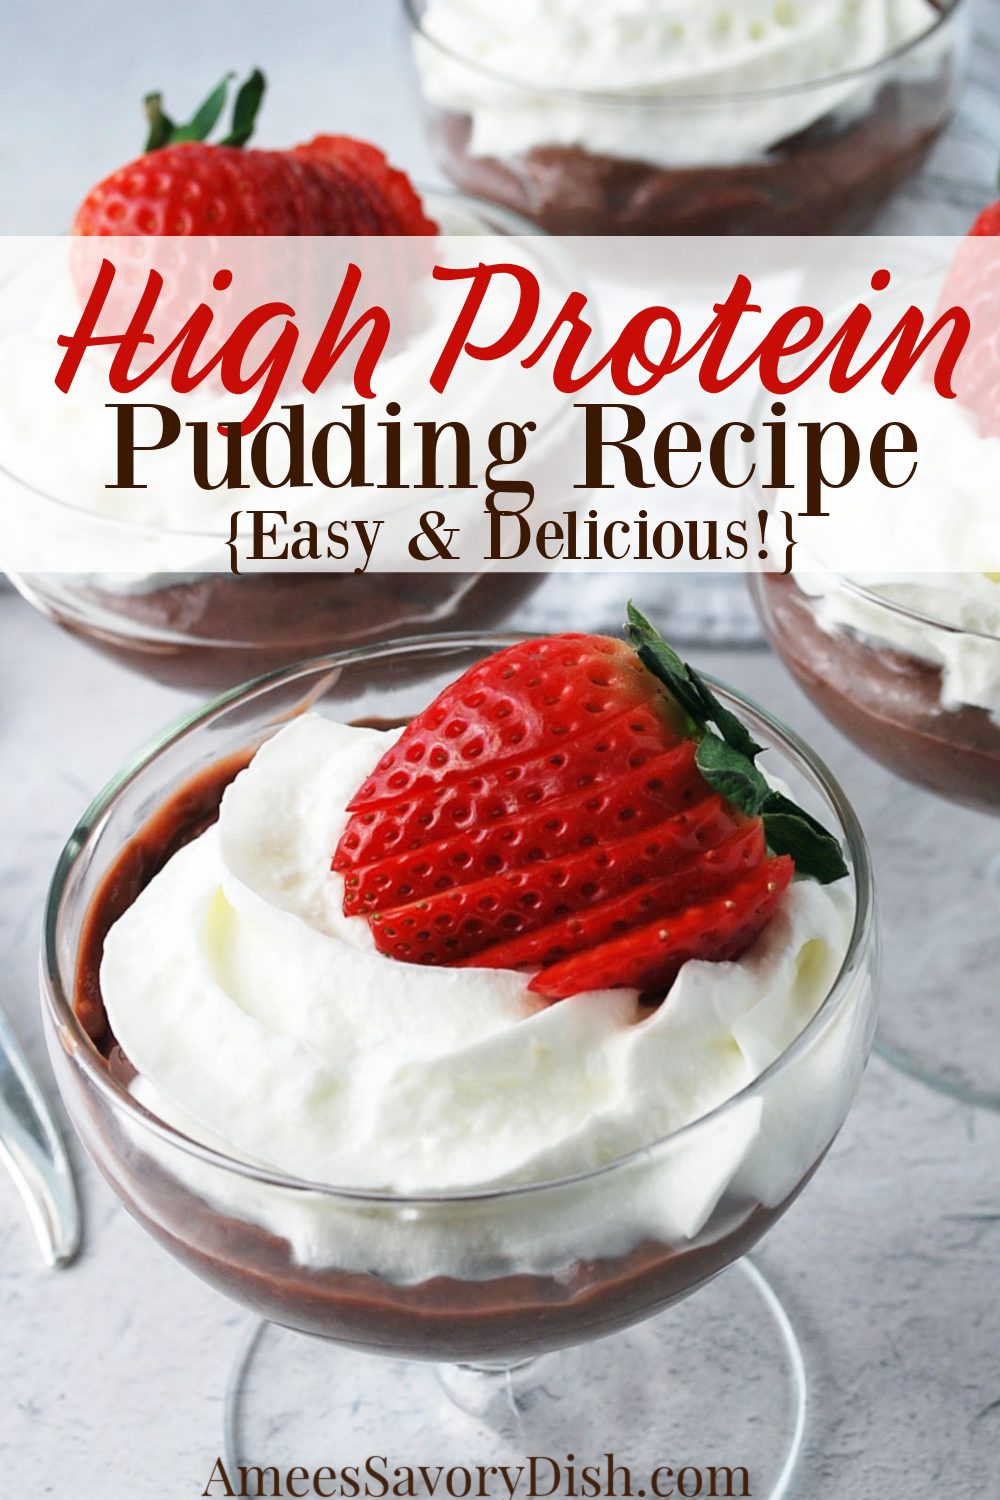 This protein pudding recipe is a delicious dessert alternative packed with muscle-building whey protein powder, milk, and pudding mix. #proteinpudding #pudding #proteindesserts #highproteinrecipes #healthierdesserts via @Ameessavorydish